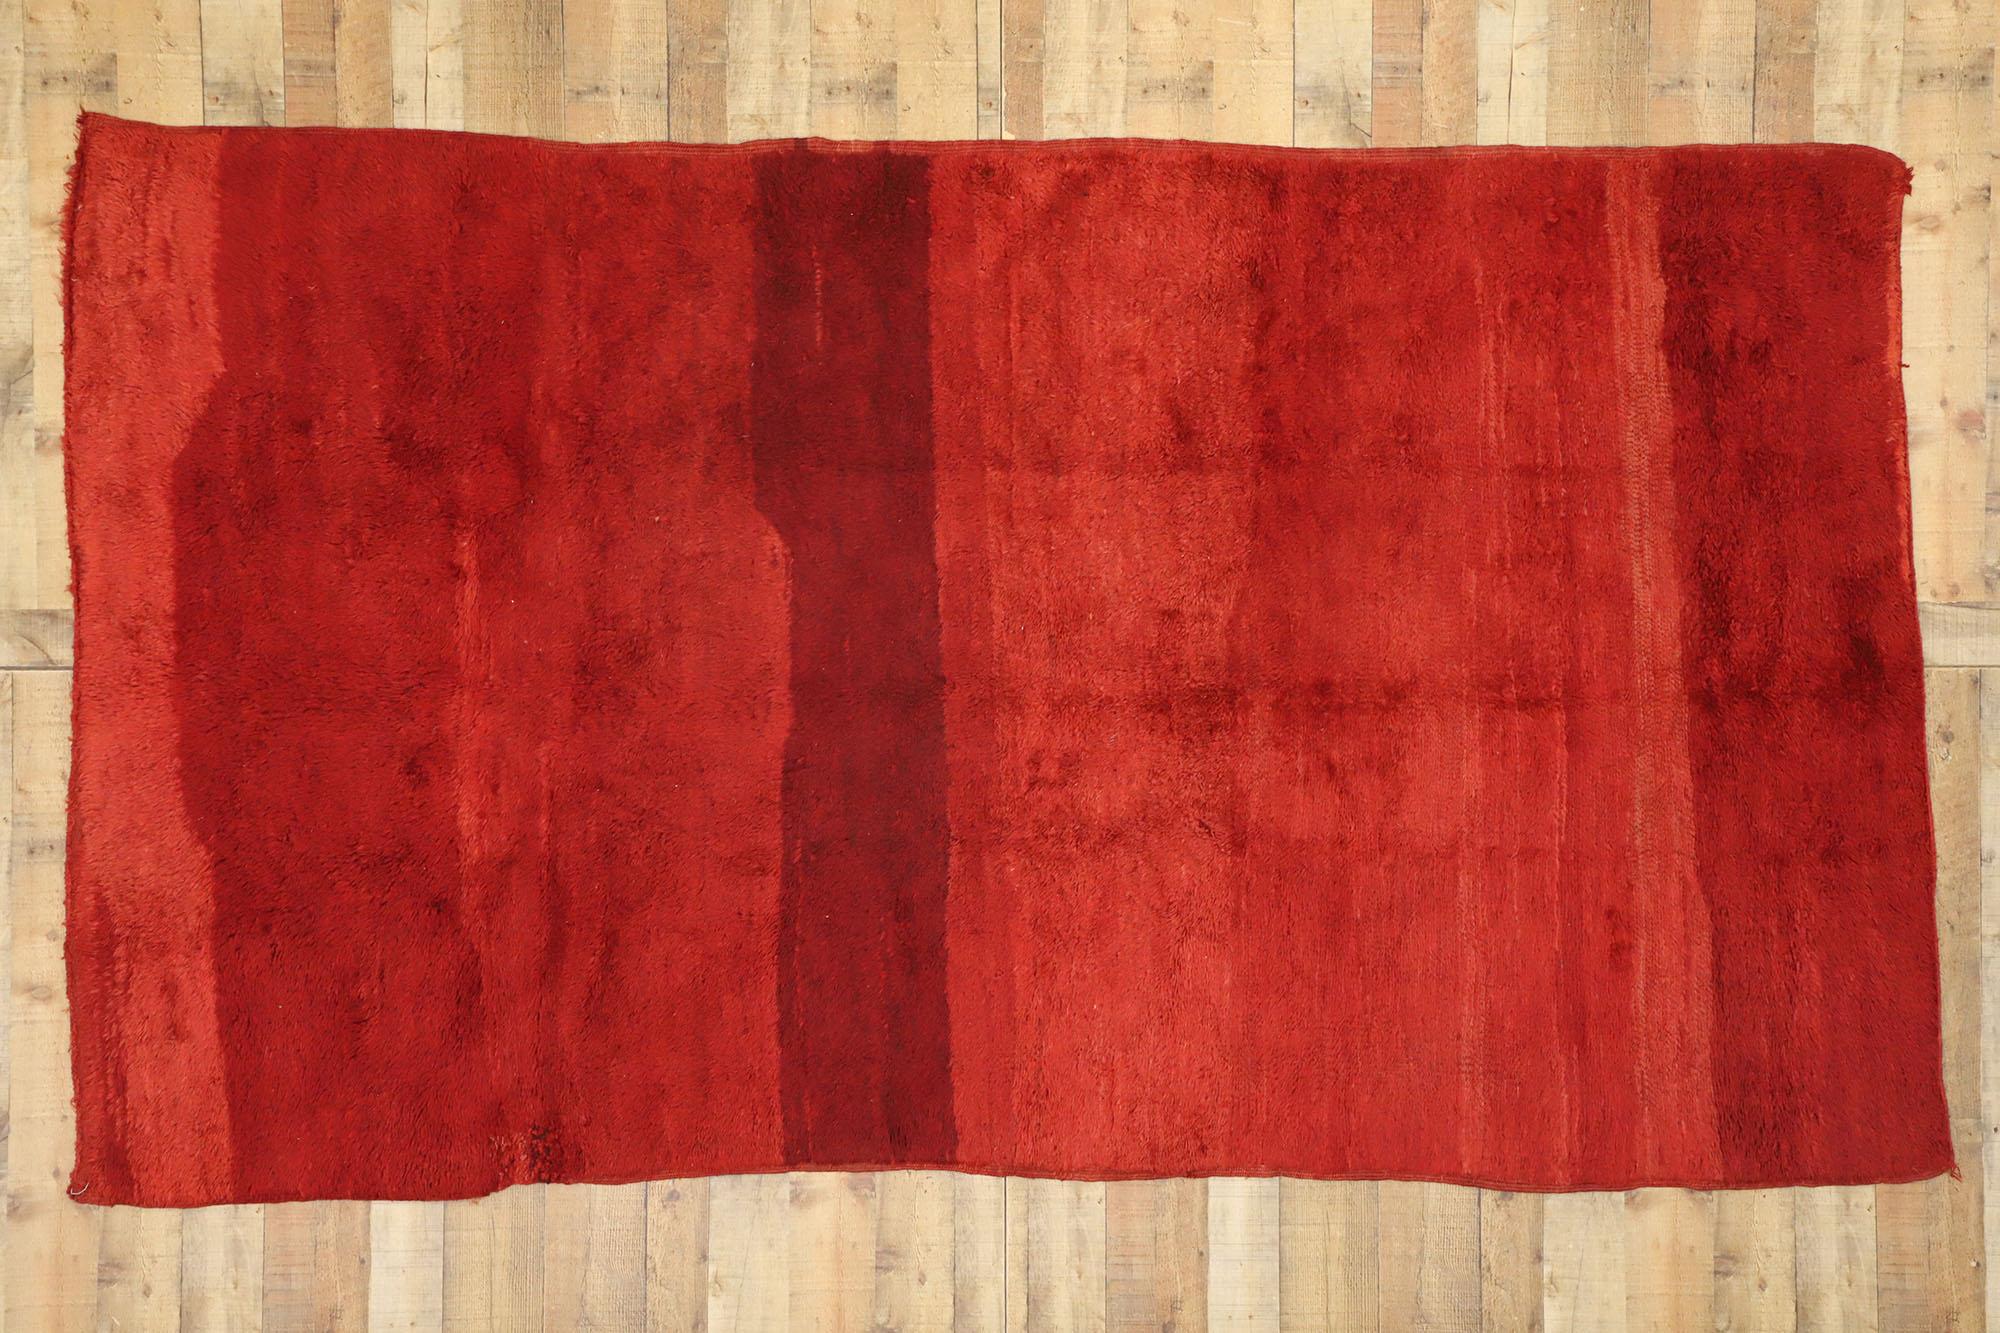 20th Century Vintage Red Beni Mrirt Moroccan Rug, Midcentury Boho Meets Expressionist Style For Sale